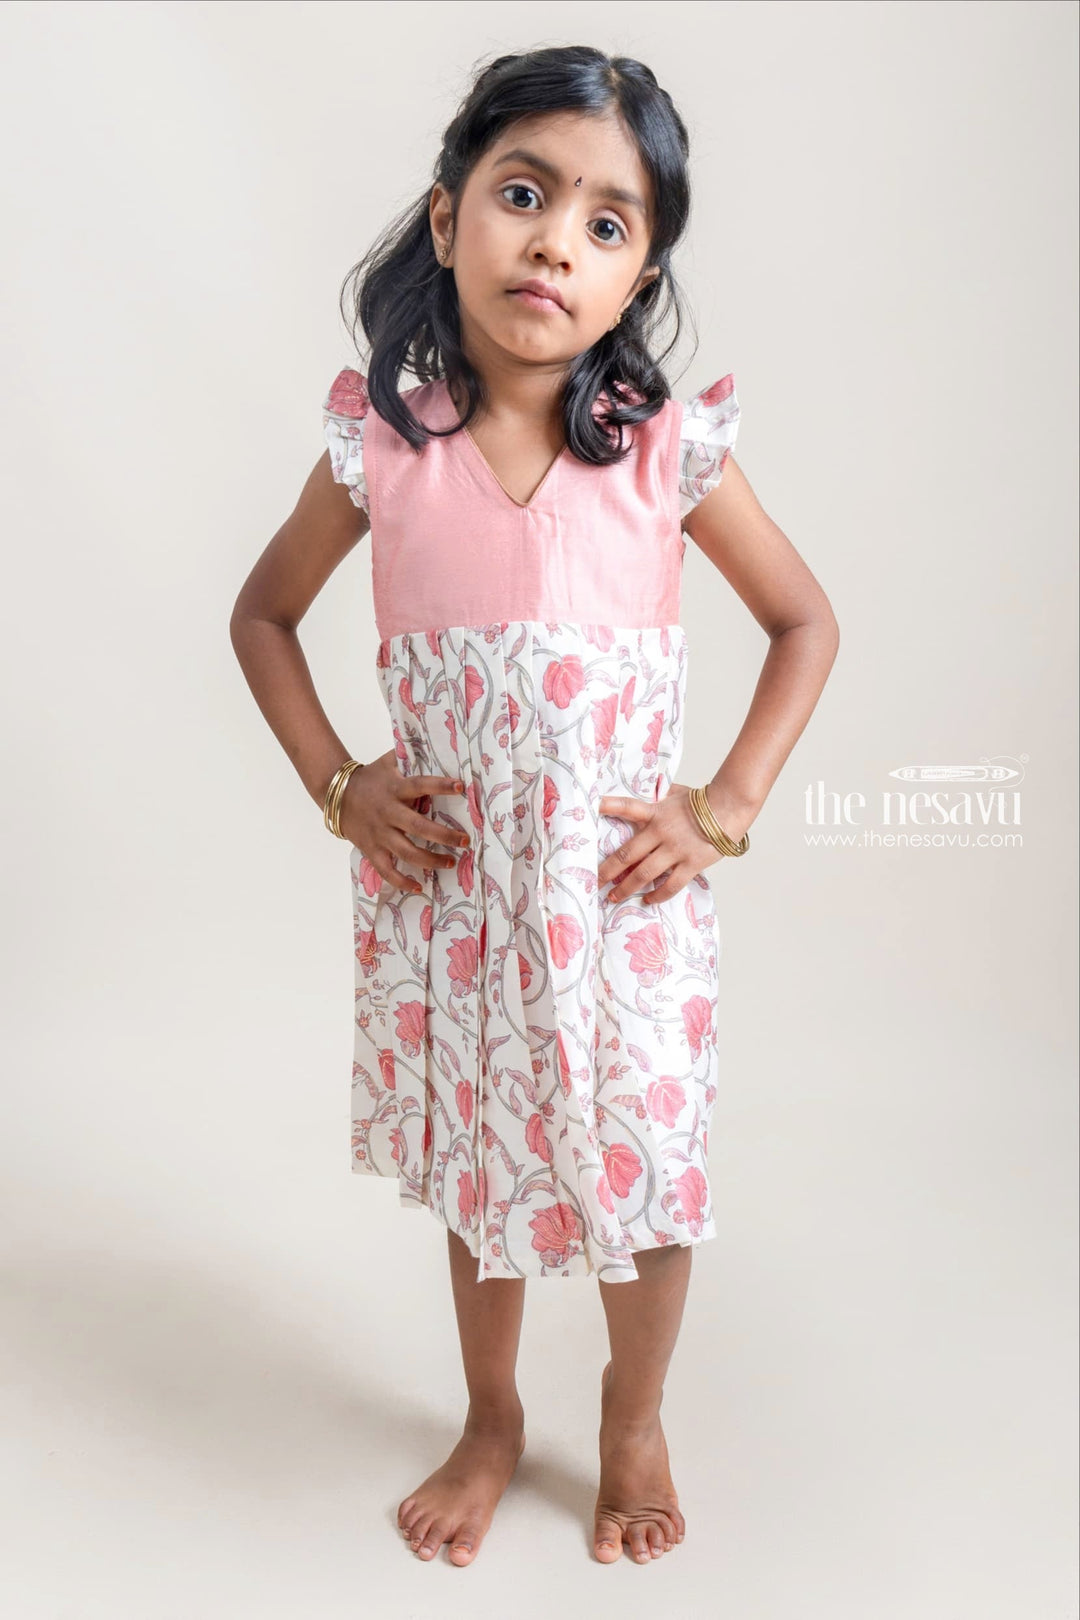 The Nesavu Girls Cotton Frock Charming Lite Pink And White Floral Printed Casual Cotton Frock For Girls Nesavu 12 (3M) / Pink / Cotton GFC750A-12 Lovely Pink Floral Cotton Frocks | New Girls Collection | The Nesavu